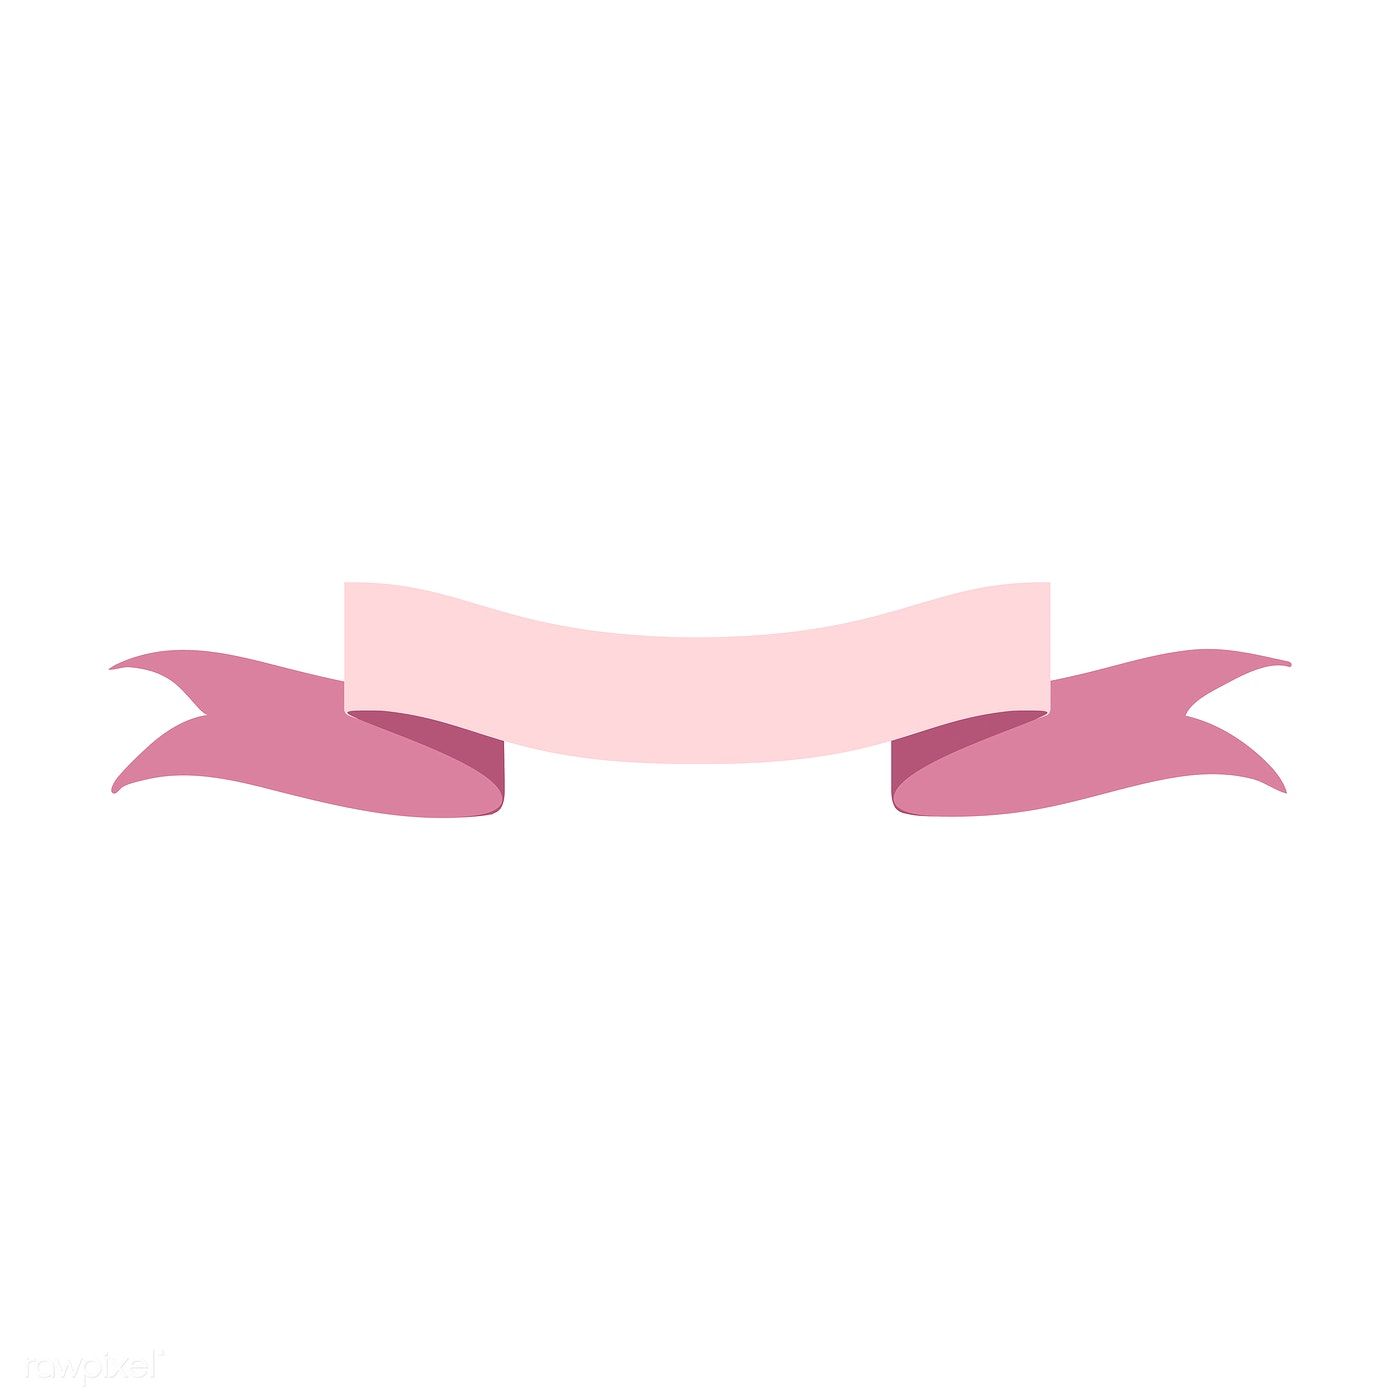 Pink ribbon banner doodle style vector.